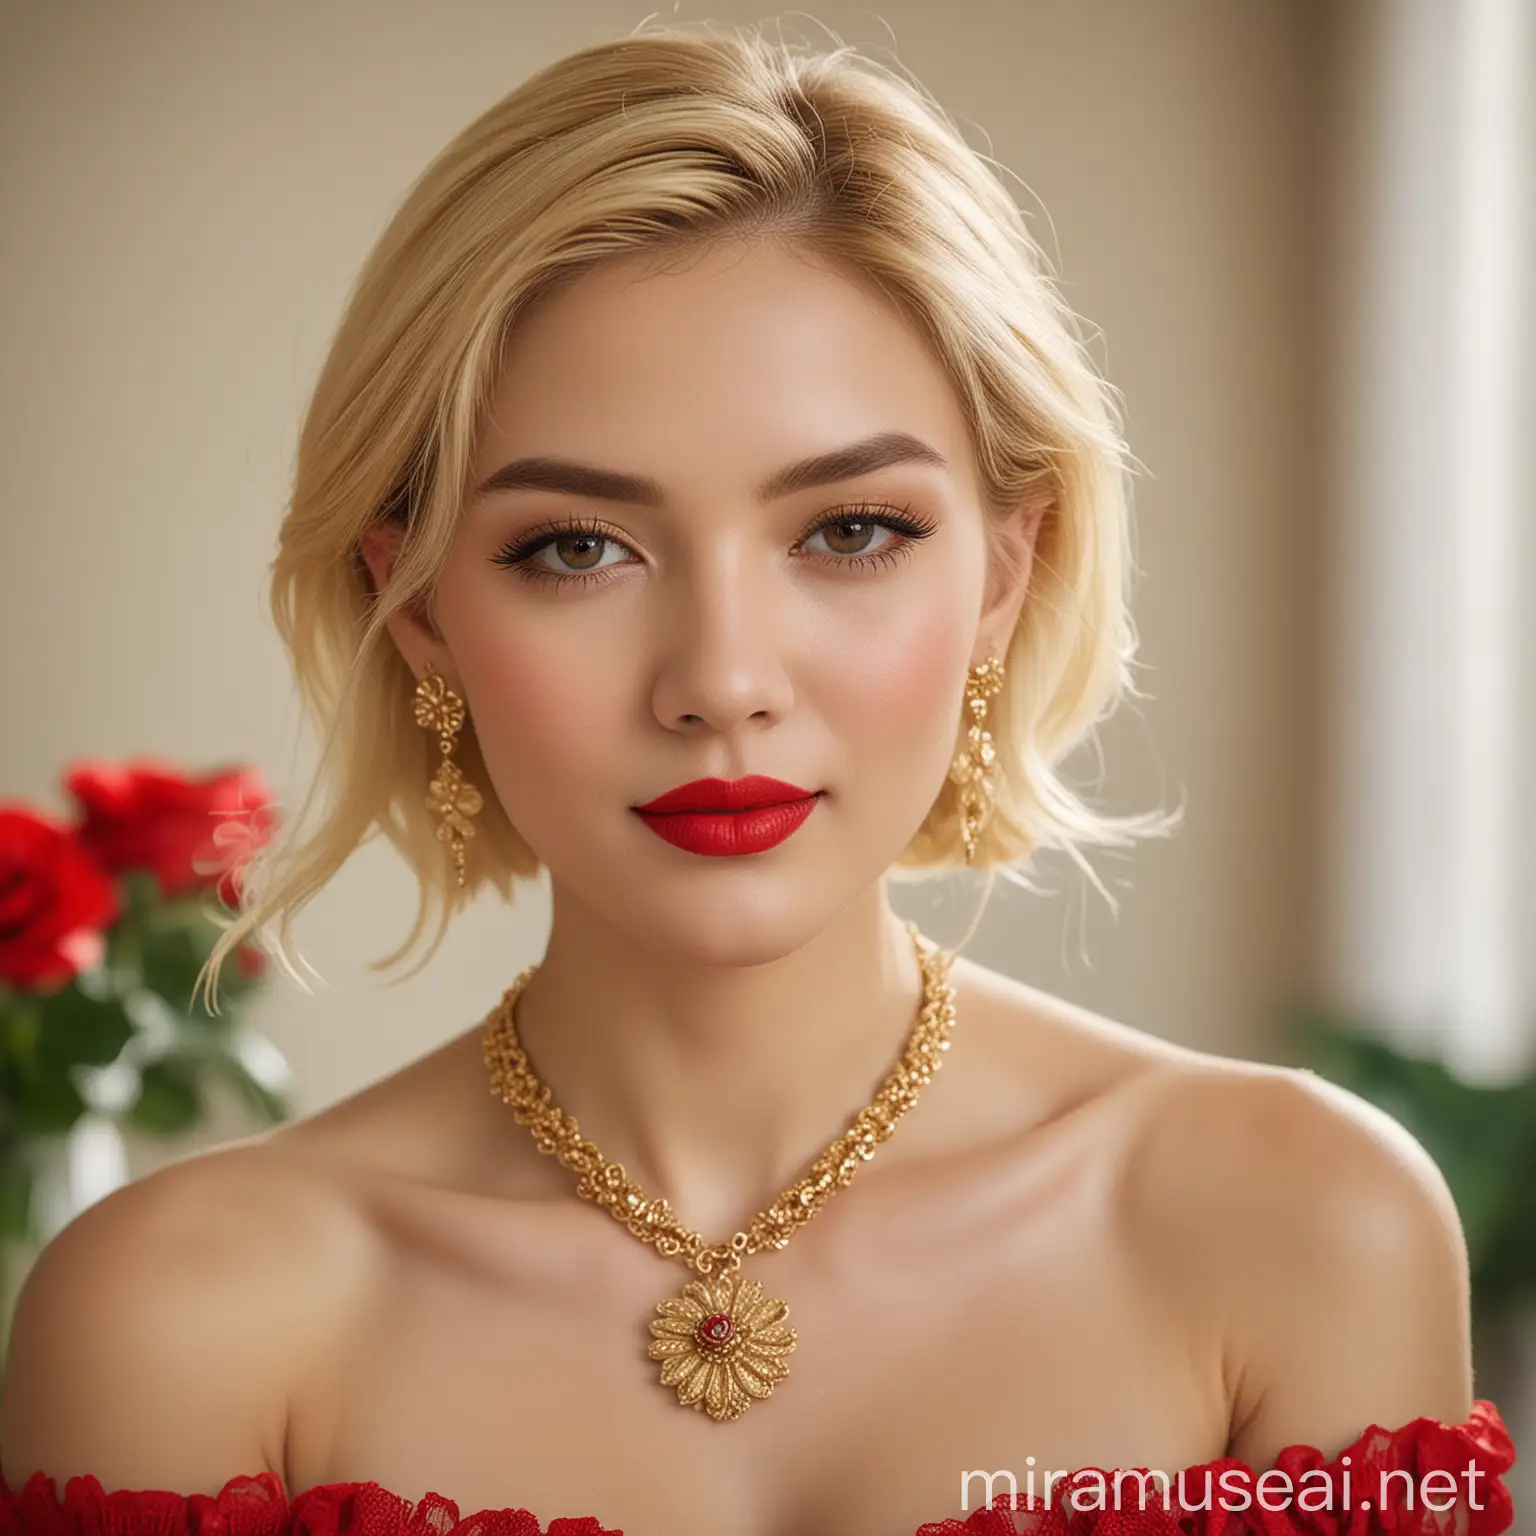 Blonde Woman Portrait with Red Lipstick and Gold Jewelry